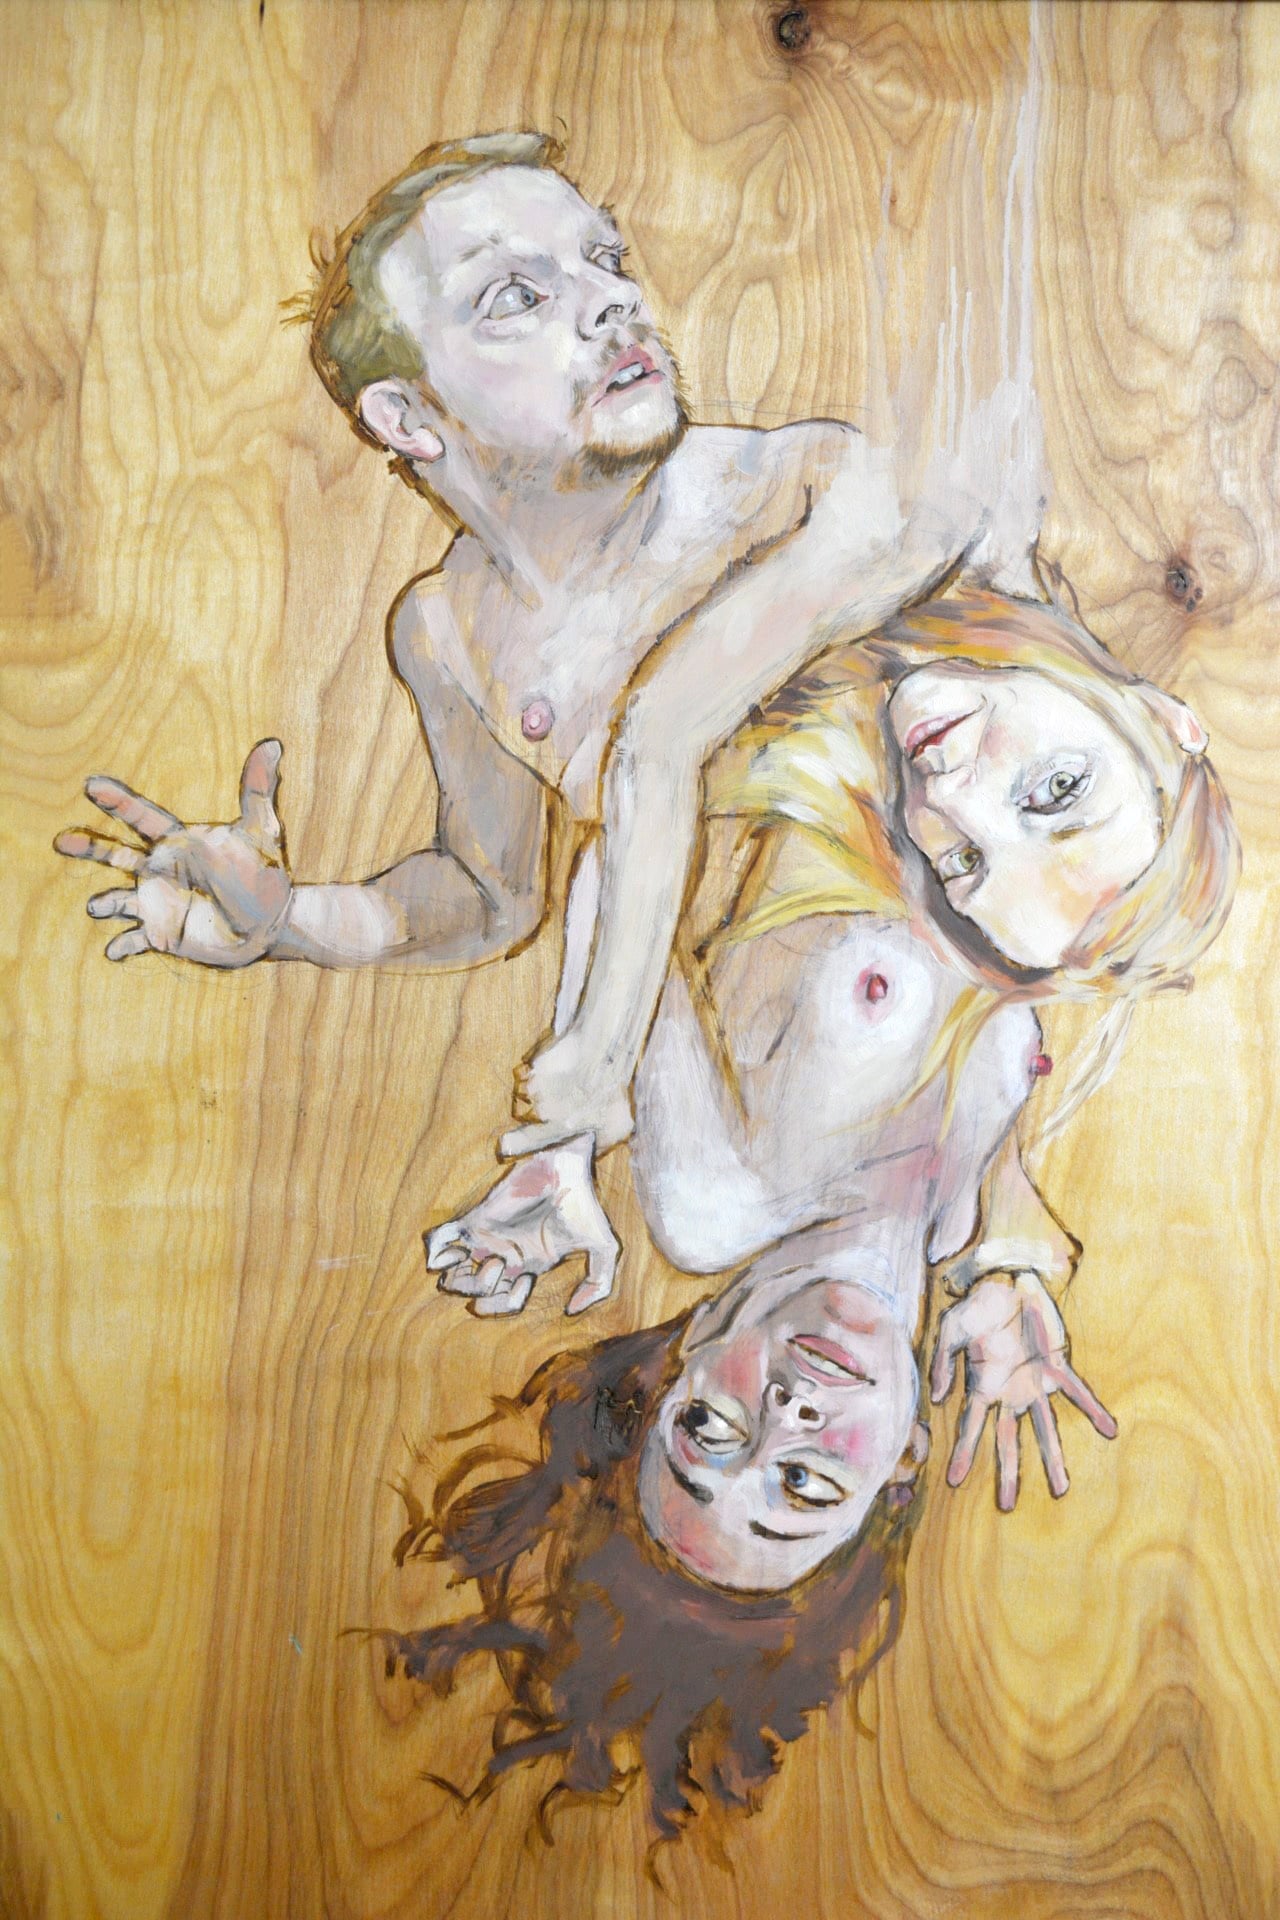 detail of "Five Panels/Two Stars", oil on assembled wood, 66" x 96", 2008.